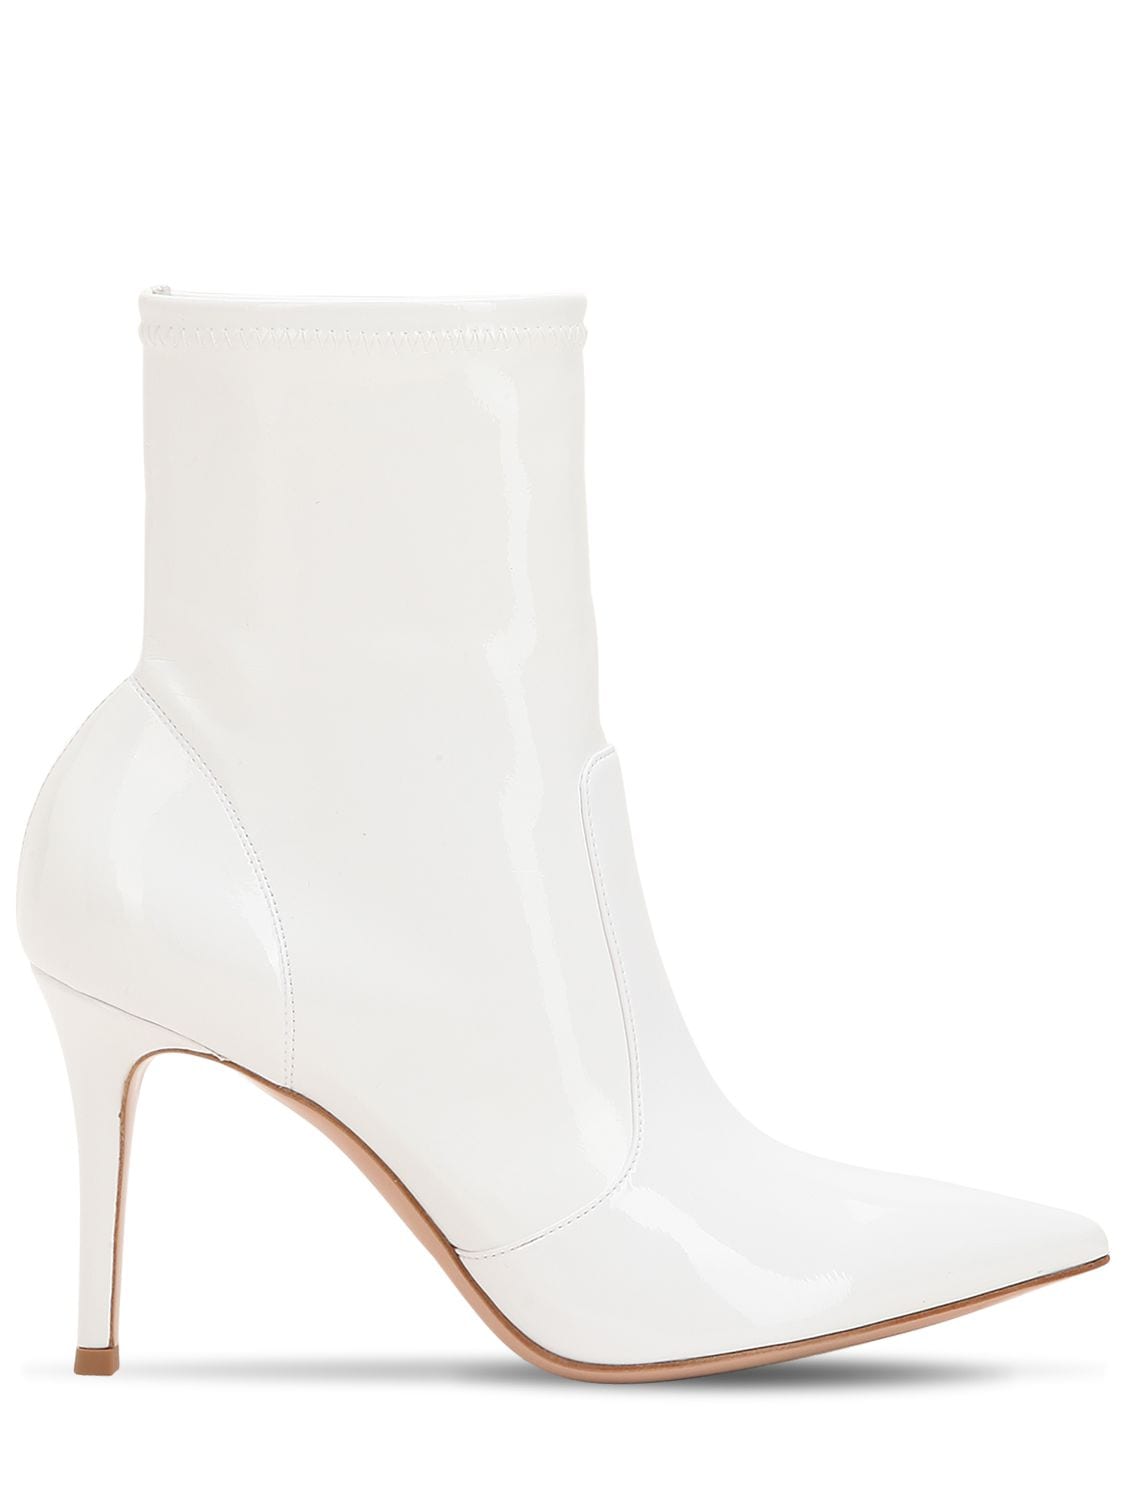 GIANVITO ROSSI 85MM STRETCH VINYL ANKLE BOOTS,68I83R002-QKLBTG2